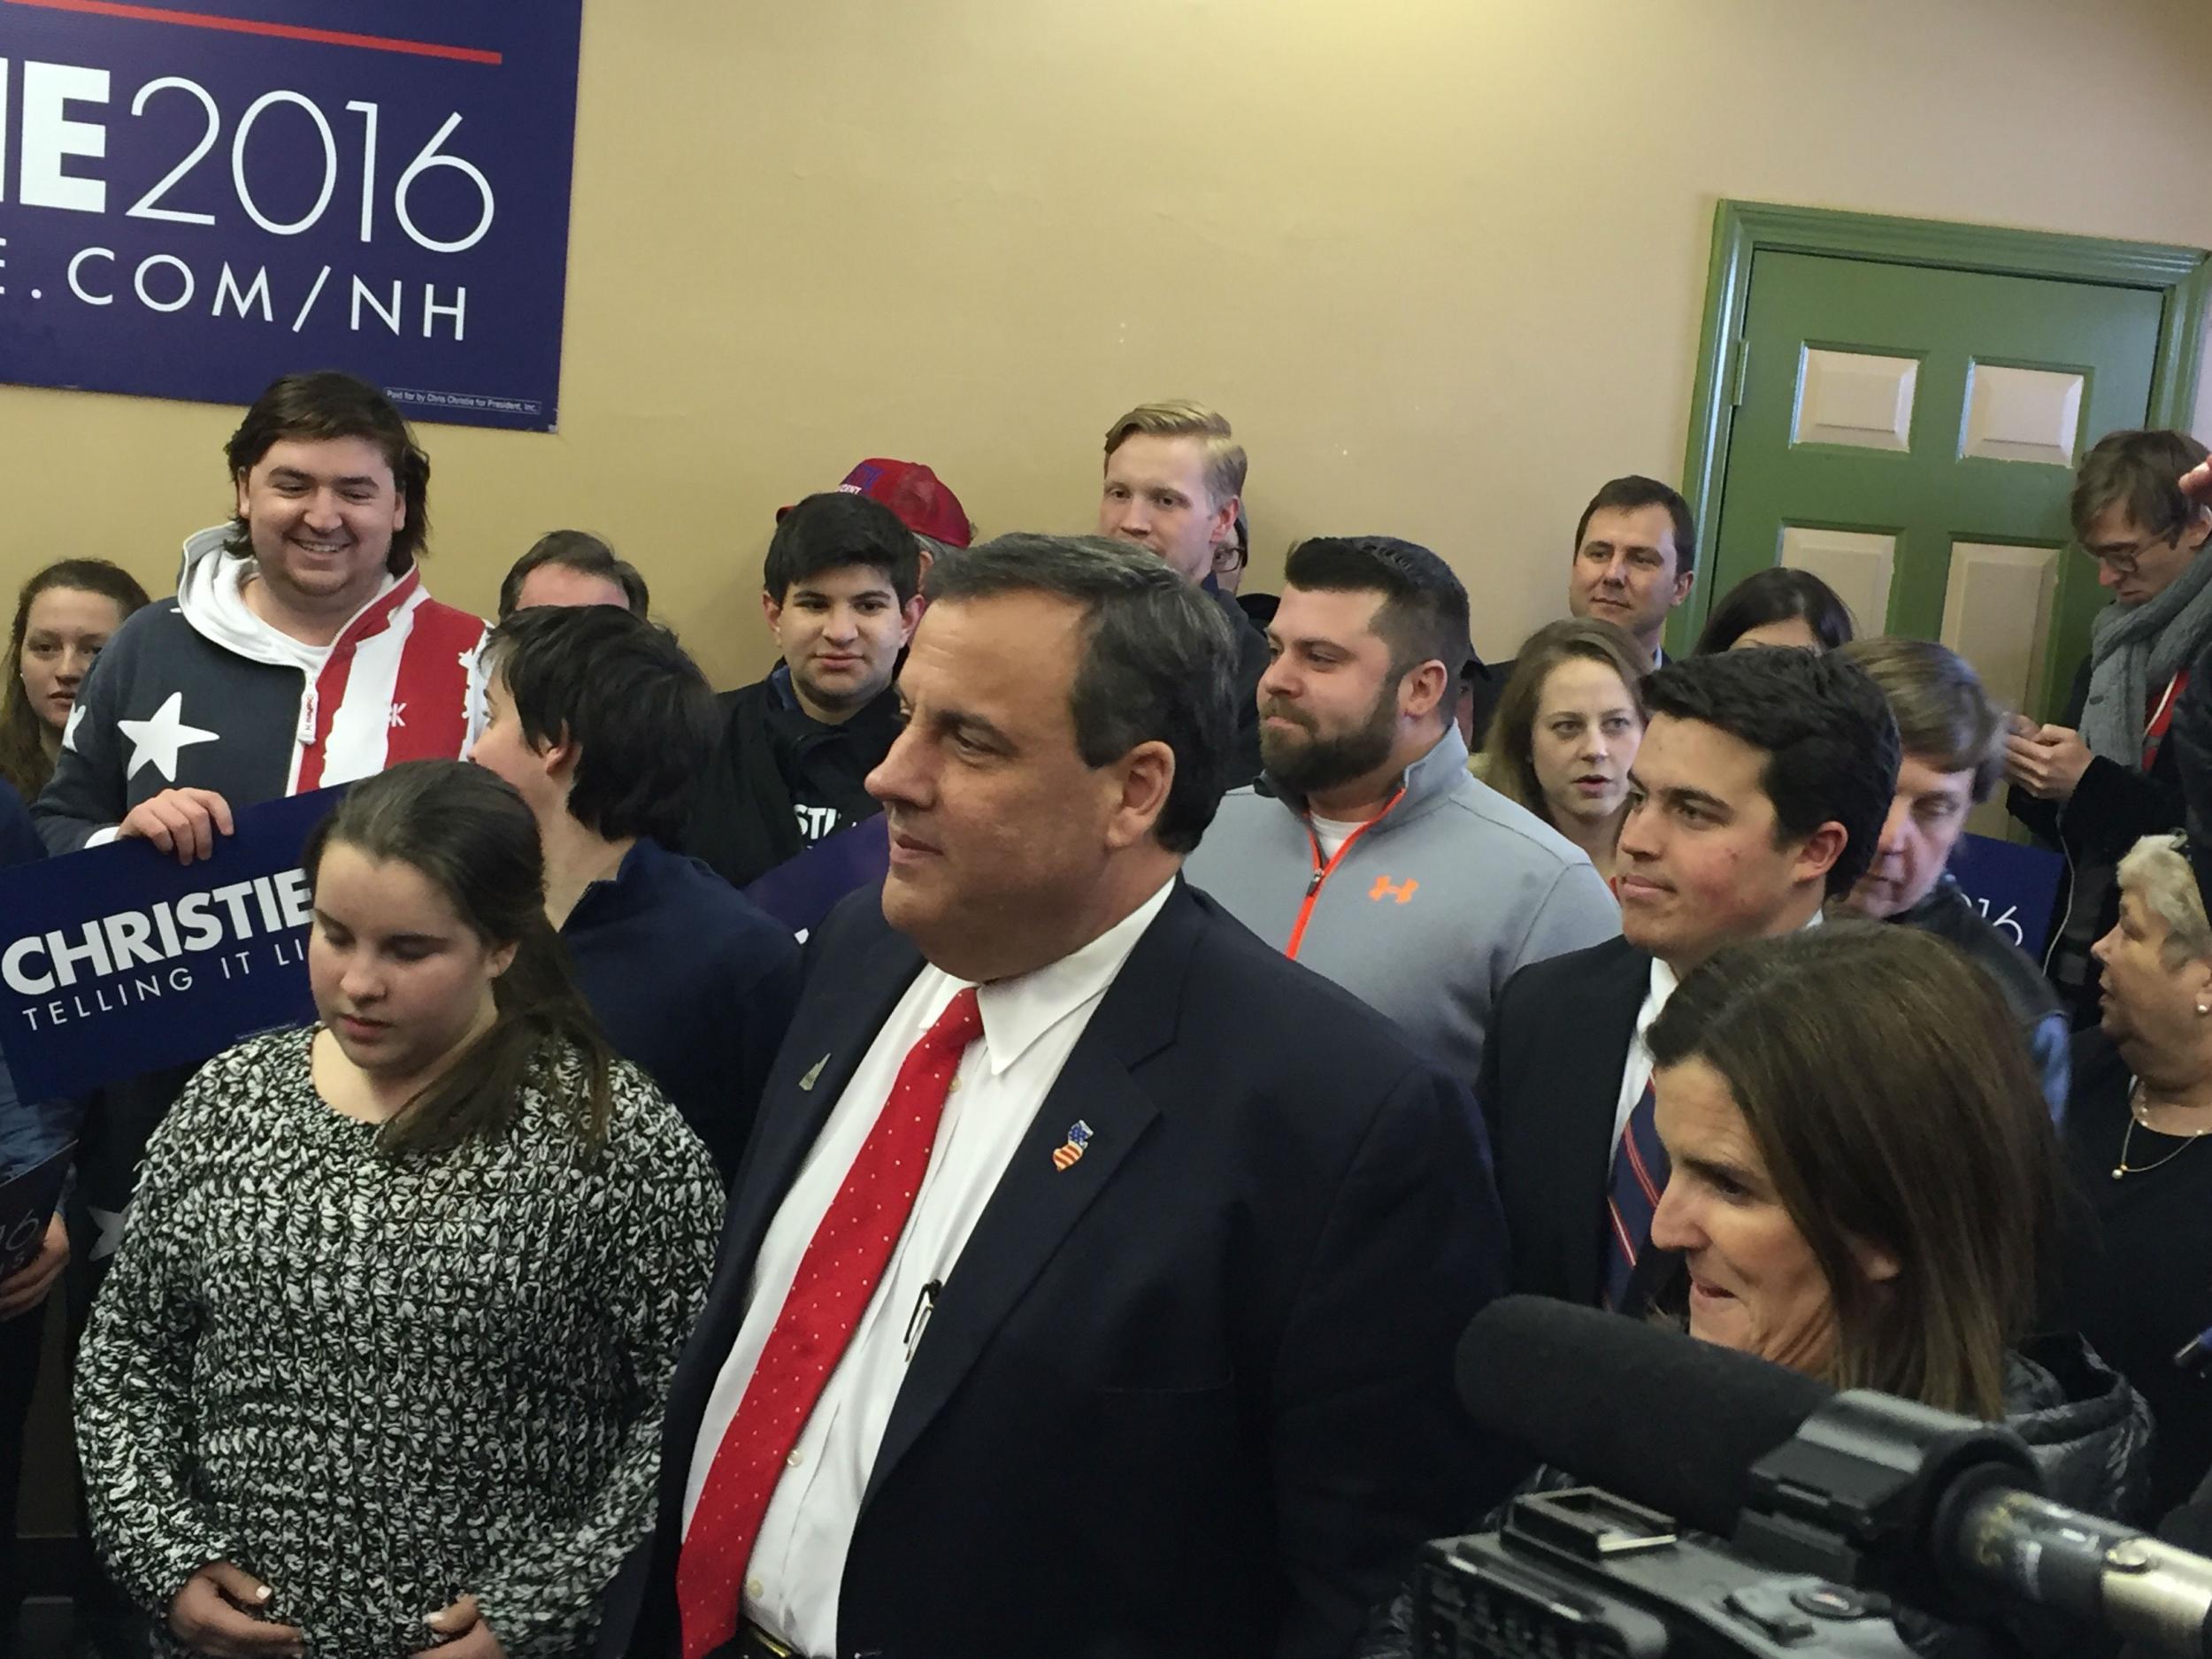 Chris Christie urged his supporters to continue to work the phones